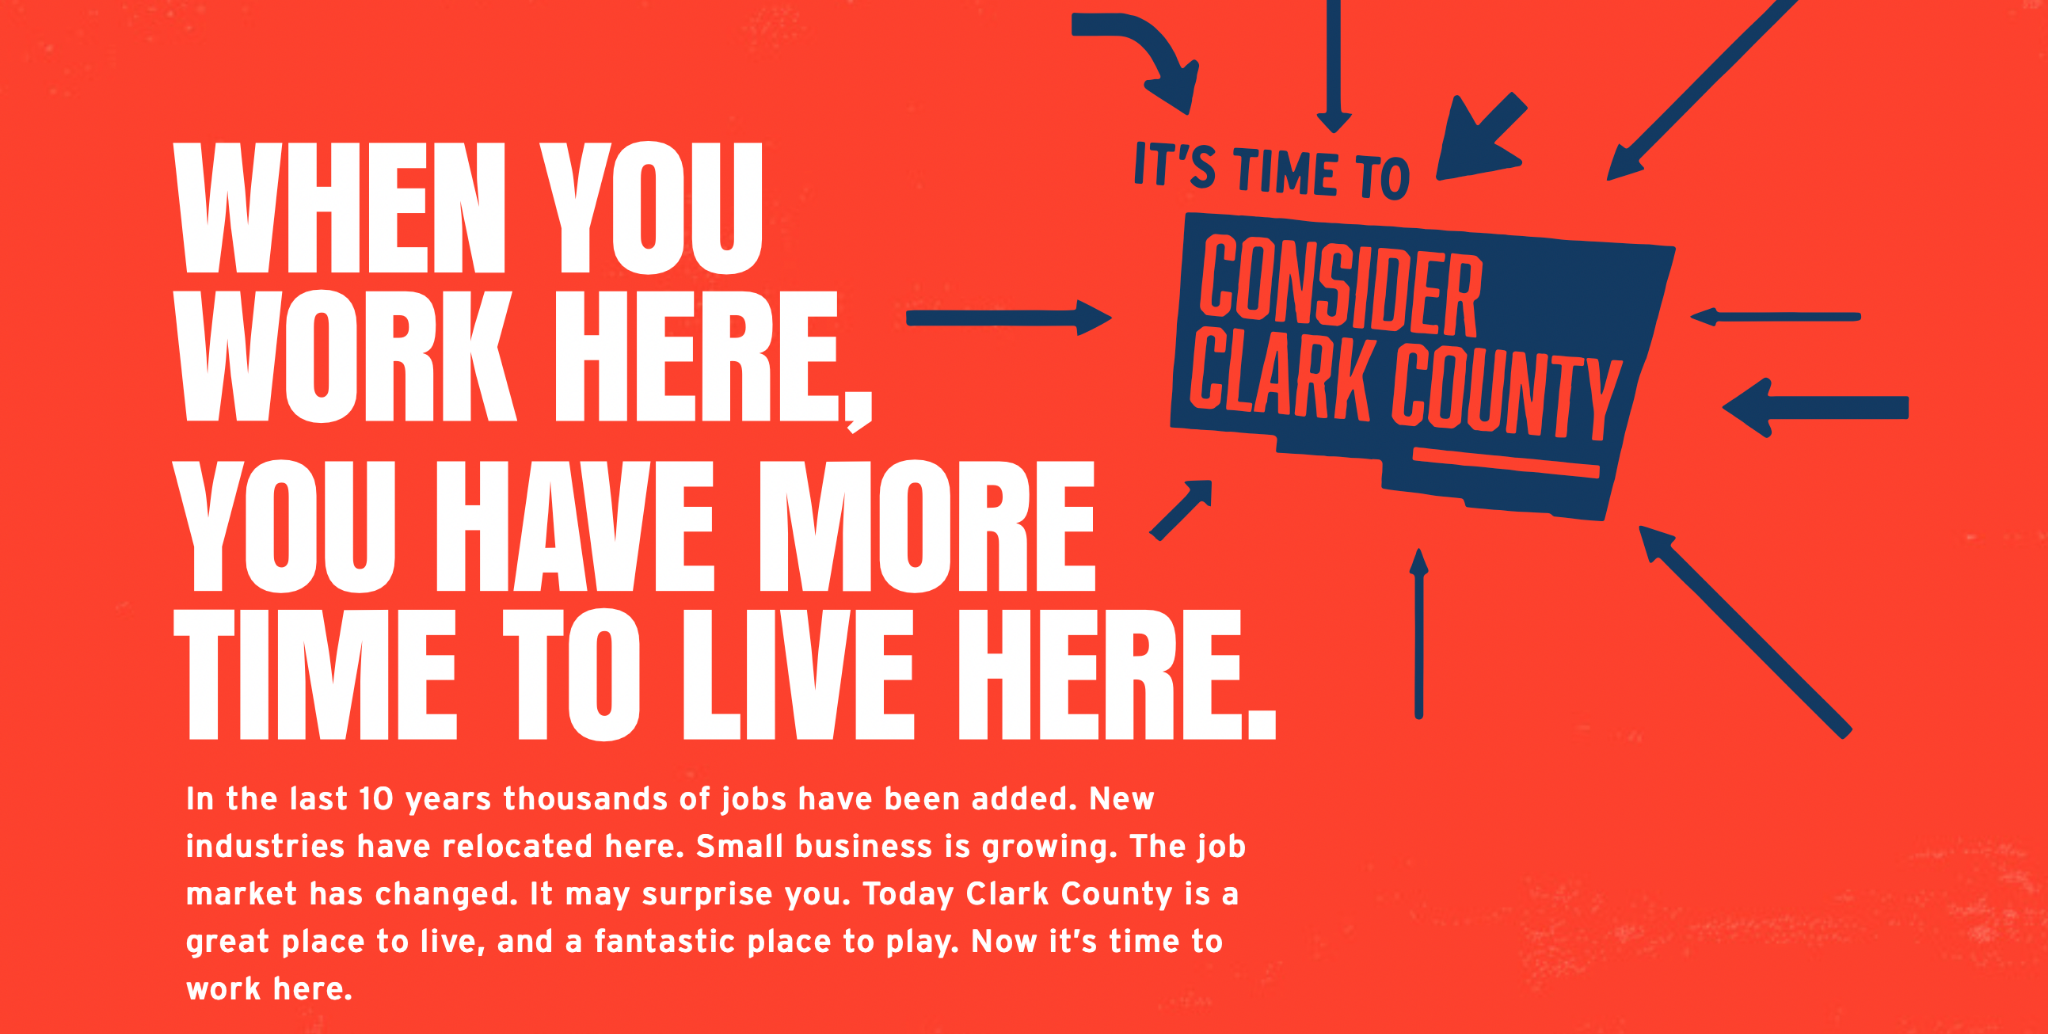 Gas is Expensive. Stop Commuting & Save Money by Working Clark County Photo